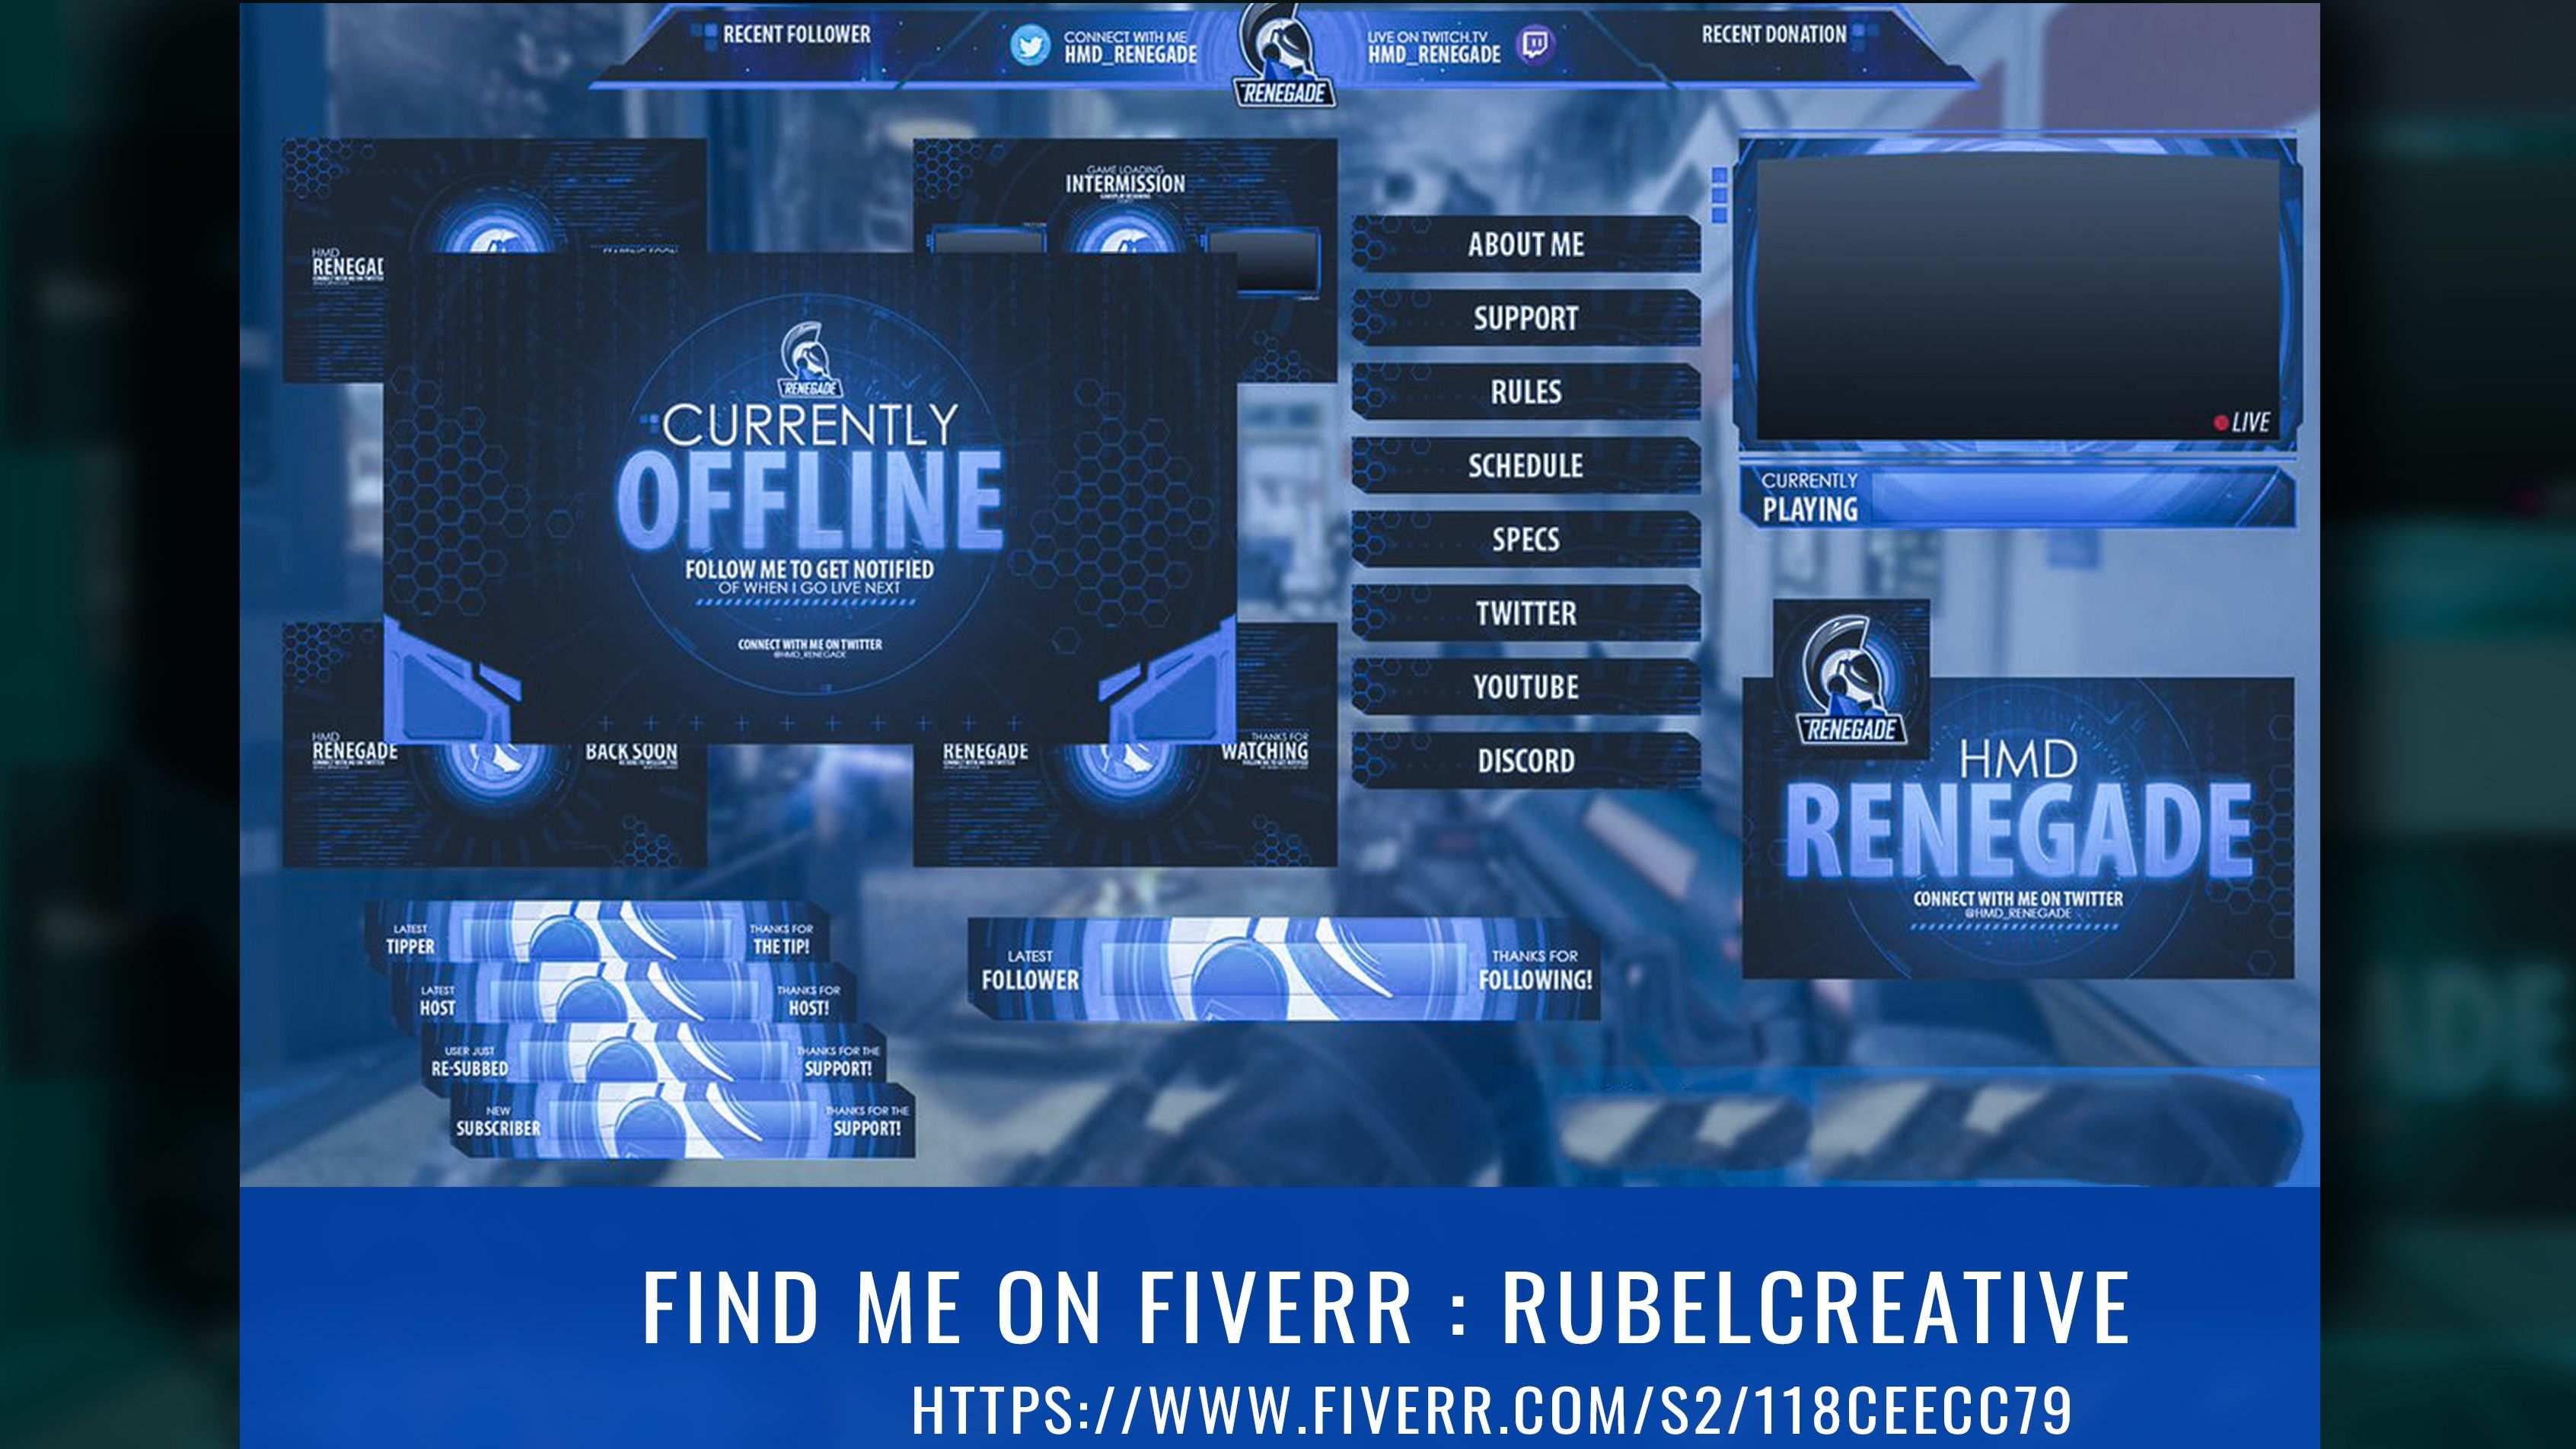 Rubelcreative I Will Design Twitch Overlay For Your Stream Platform For 10 On Fiverr Com In 2020 Overlays Twitch Streaming